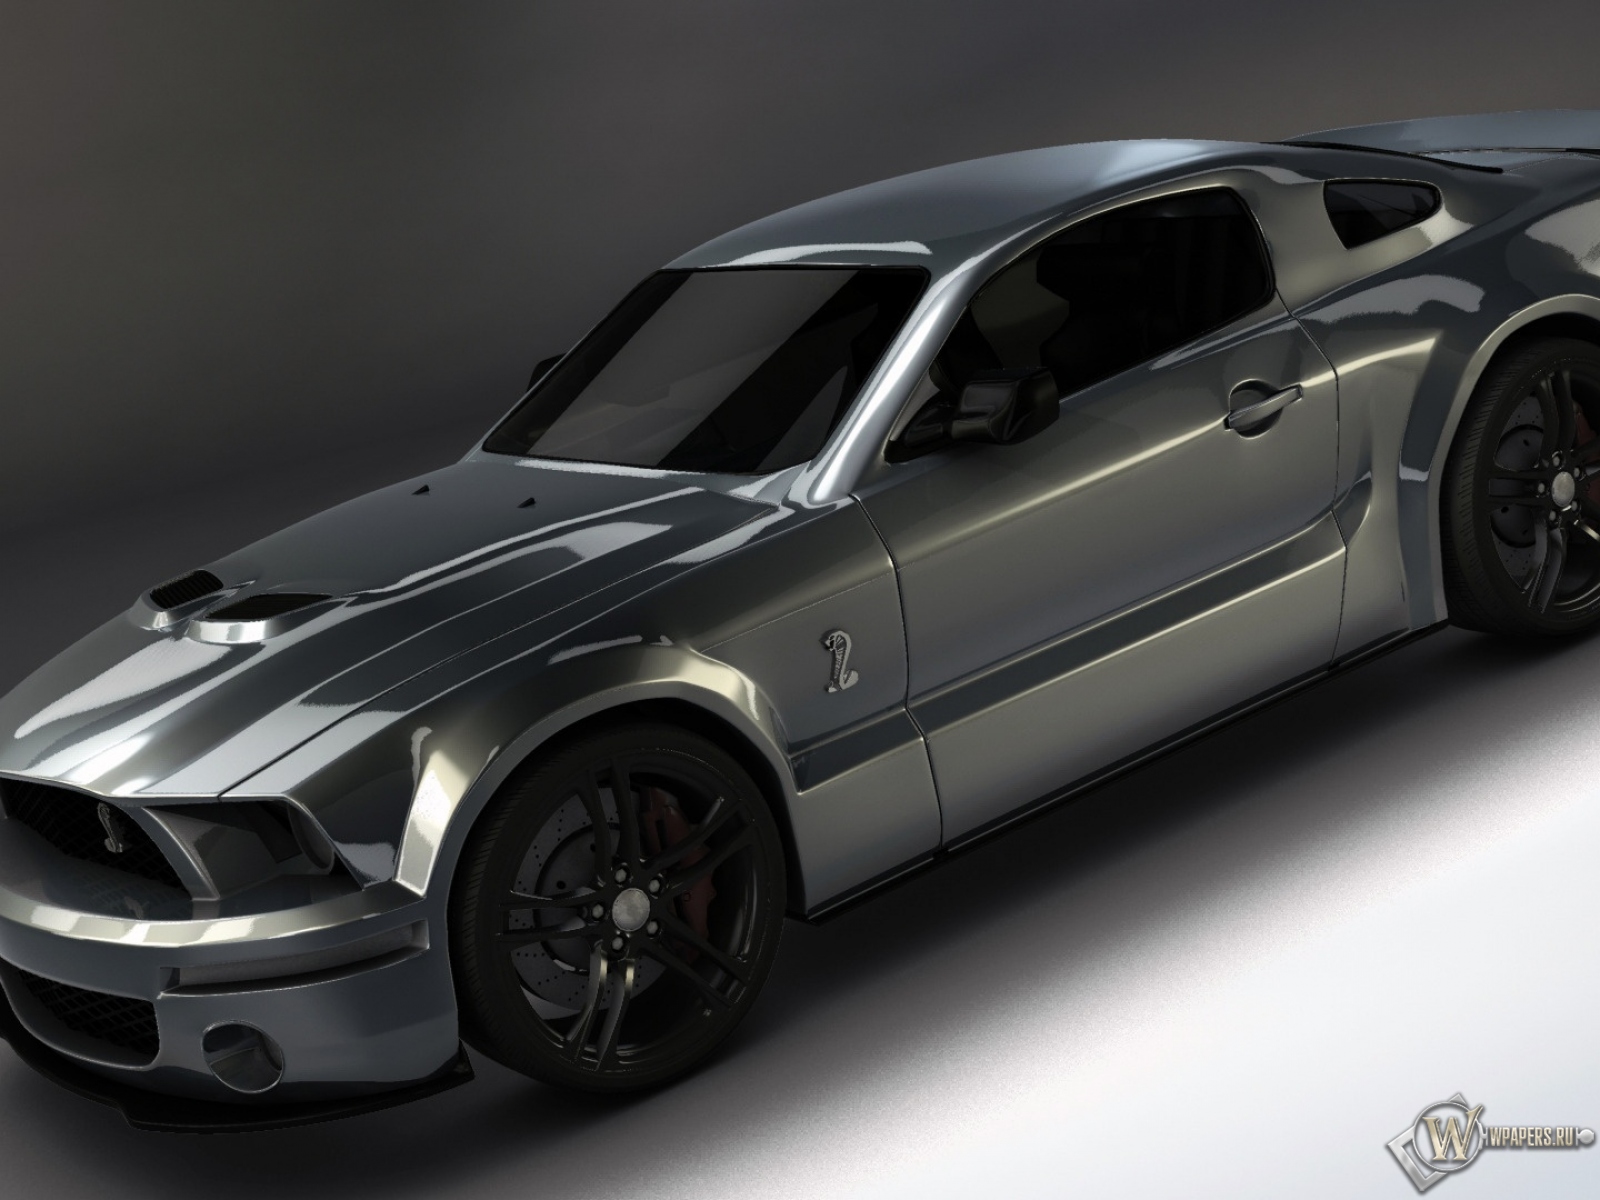 Ford Mustang Shelby GT500 1600x1200